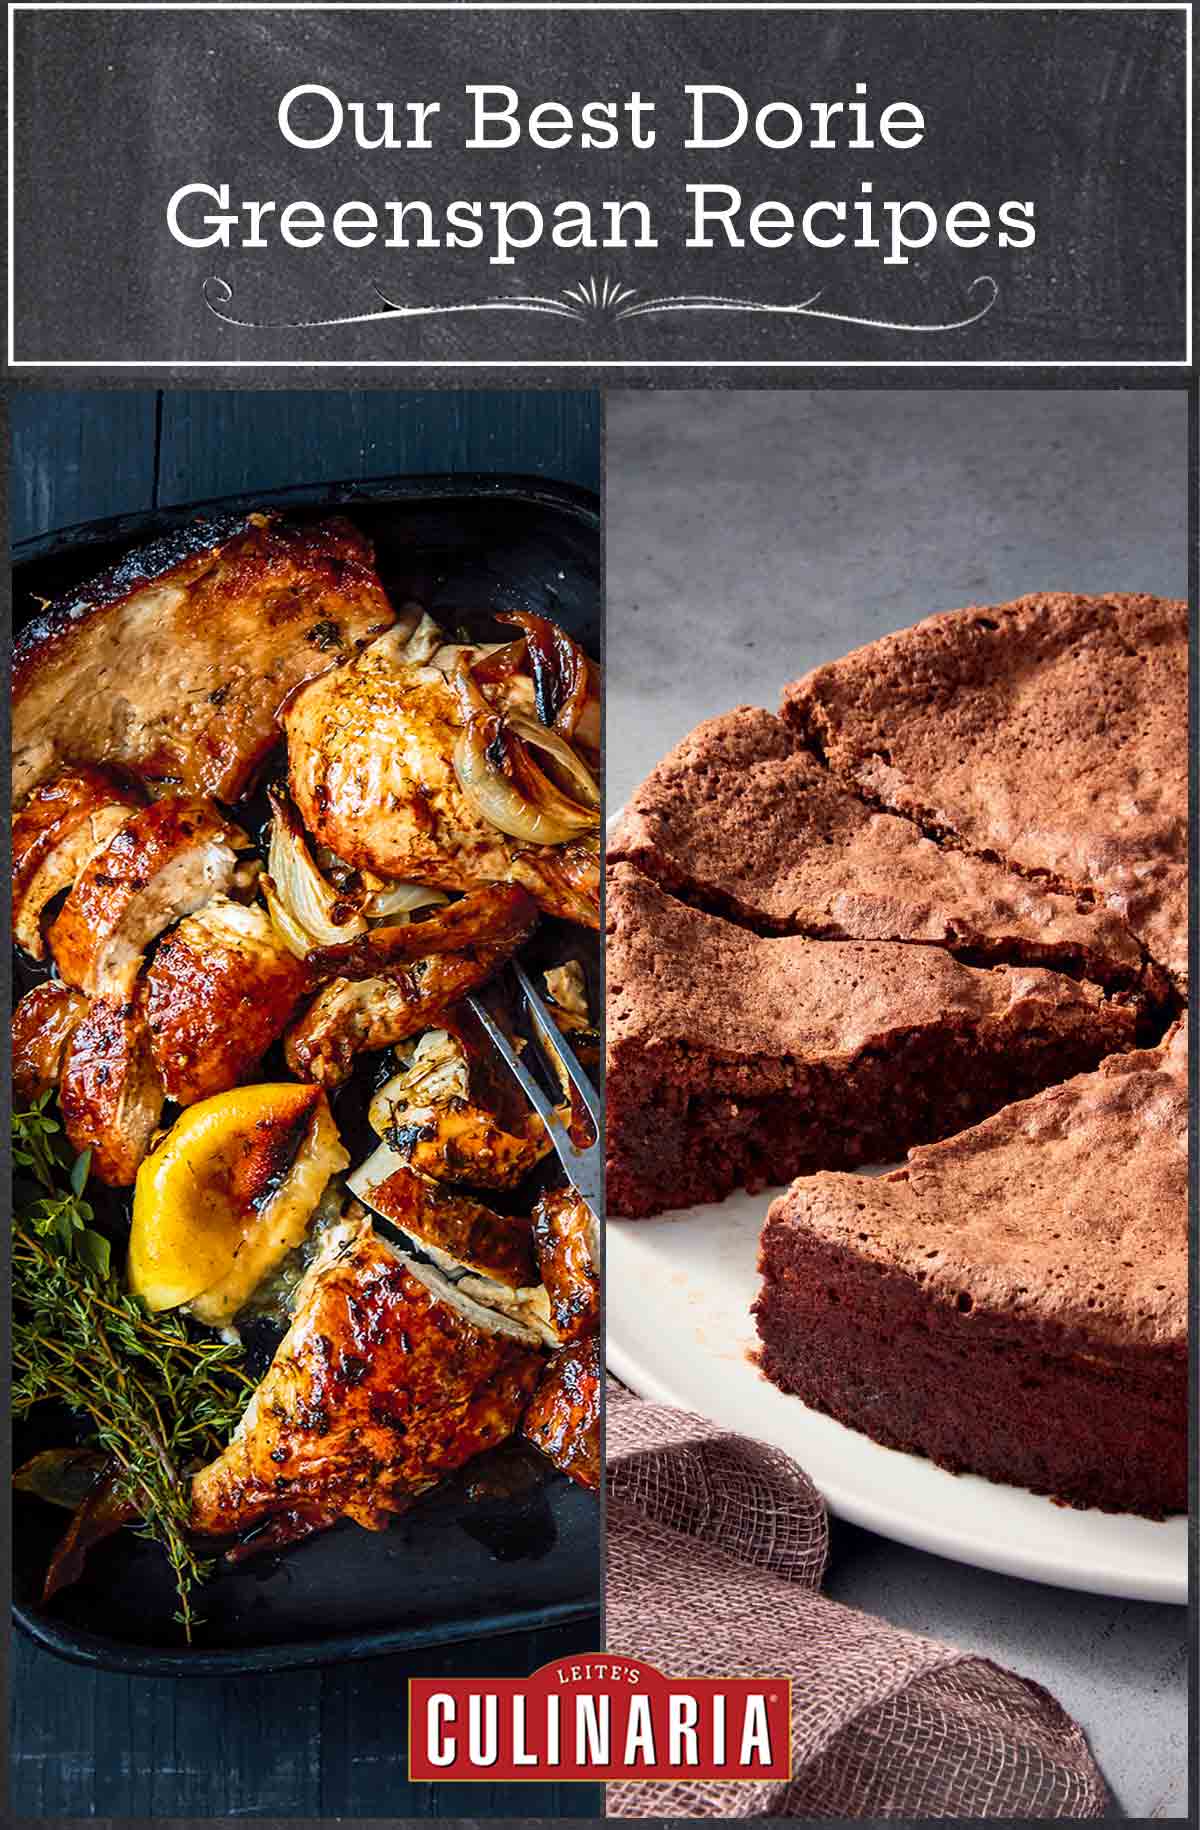 Our best Dorie Greenspan recipes including her roast chicken with herb butter and mocha walnut torte.